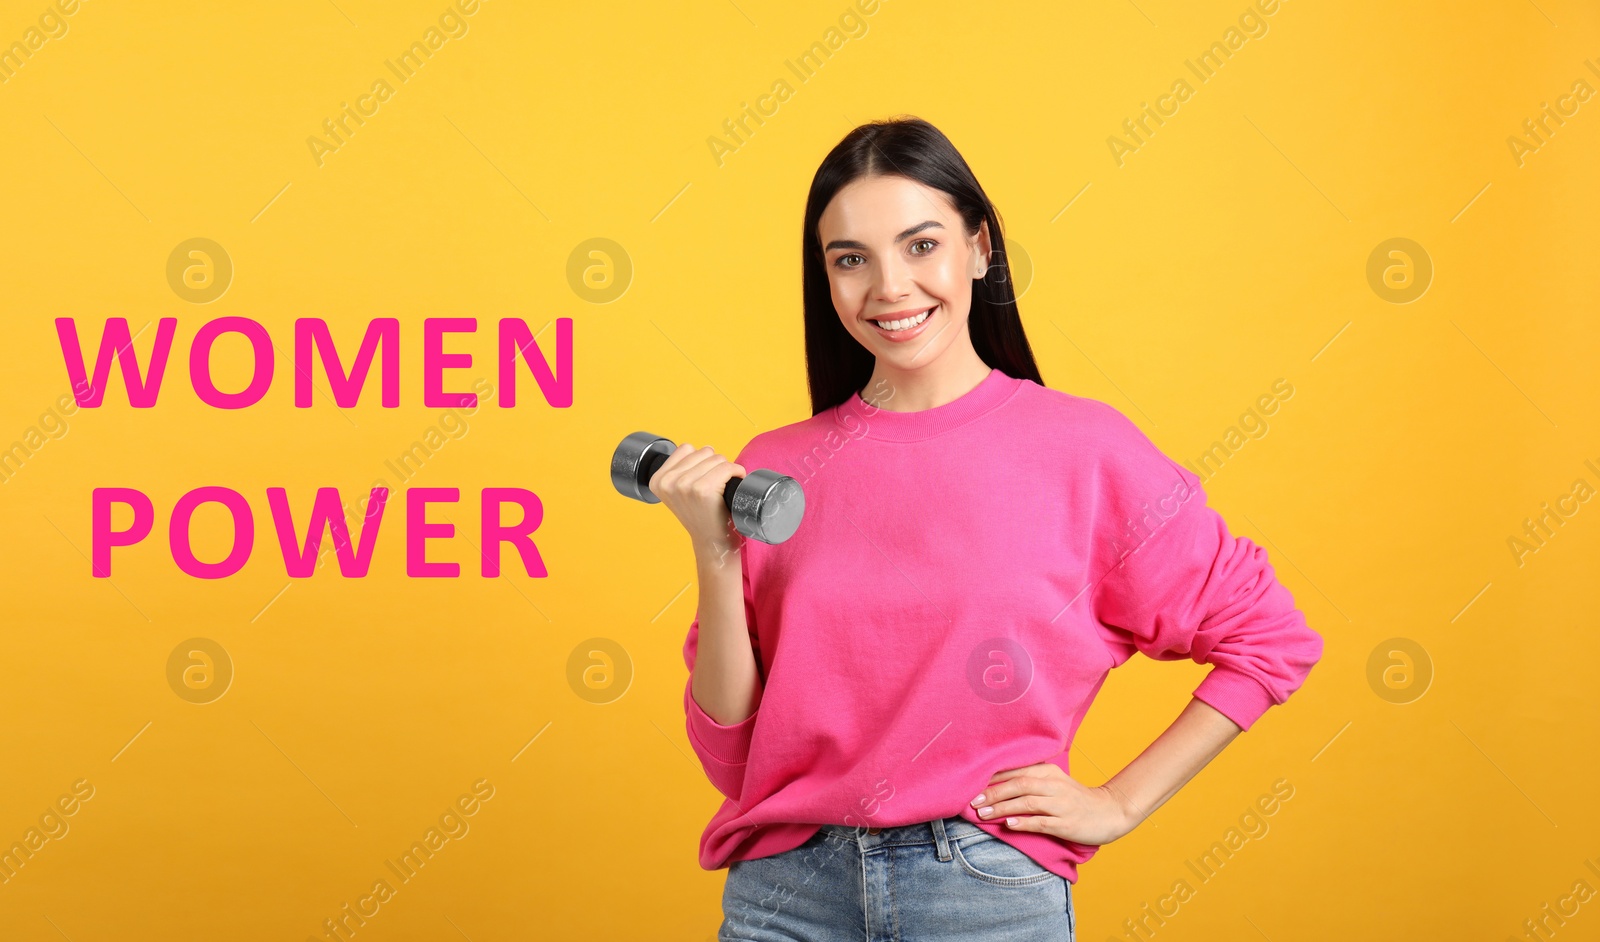 Image of 8 March greeting card. Phrase Women Power and young girl holding dumbbell on yellow background